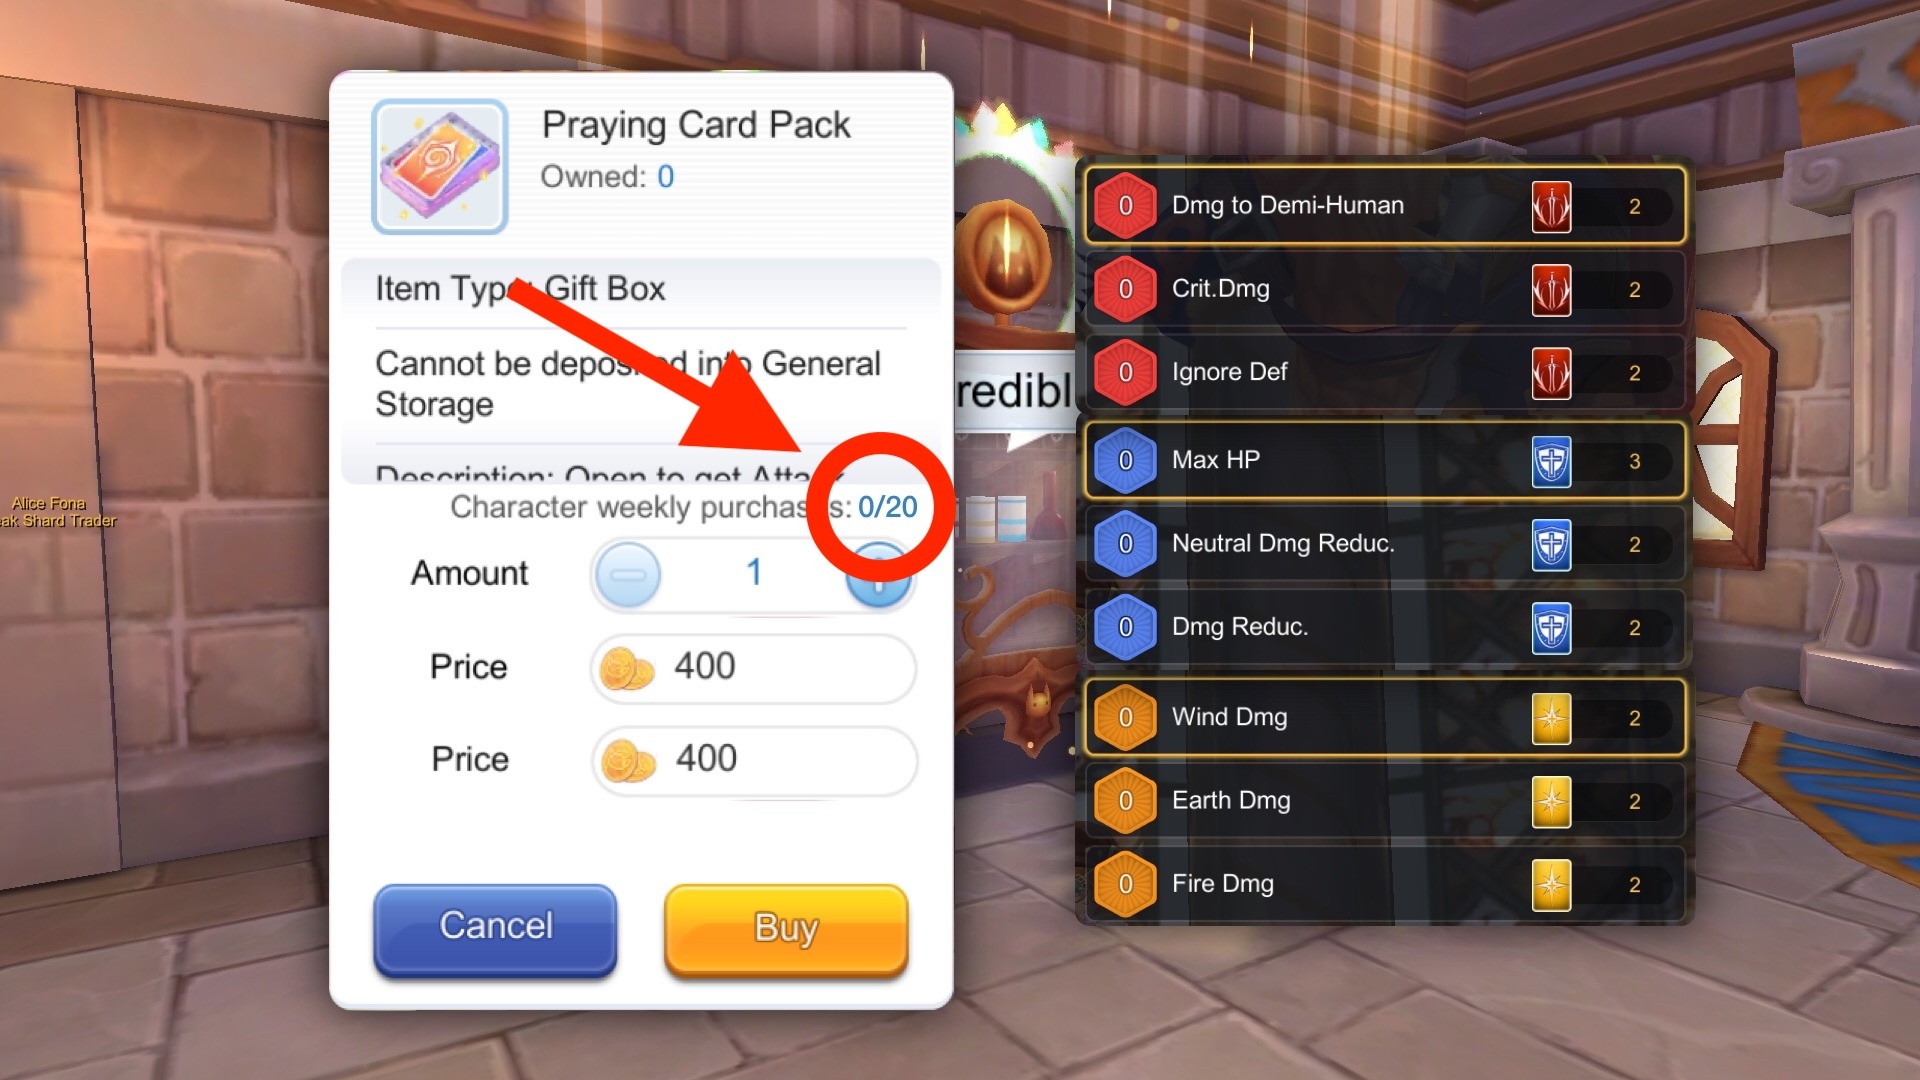 How to increase Praying Card Pack weekly purchase limit